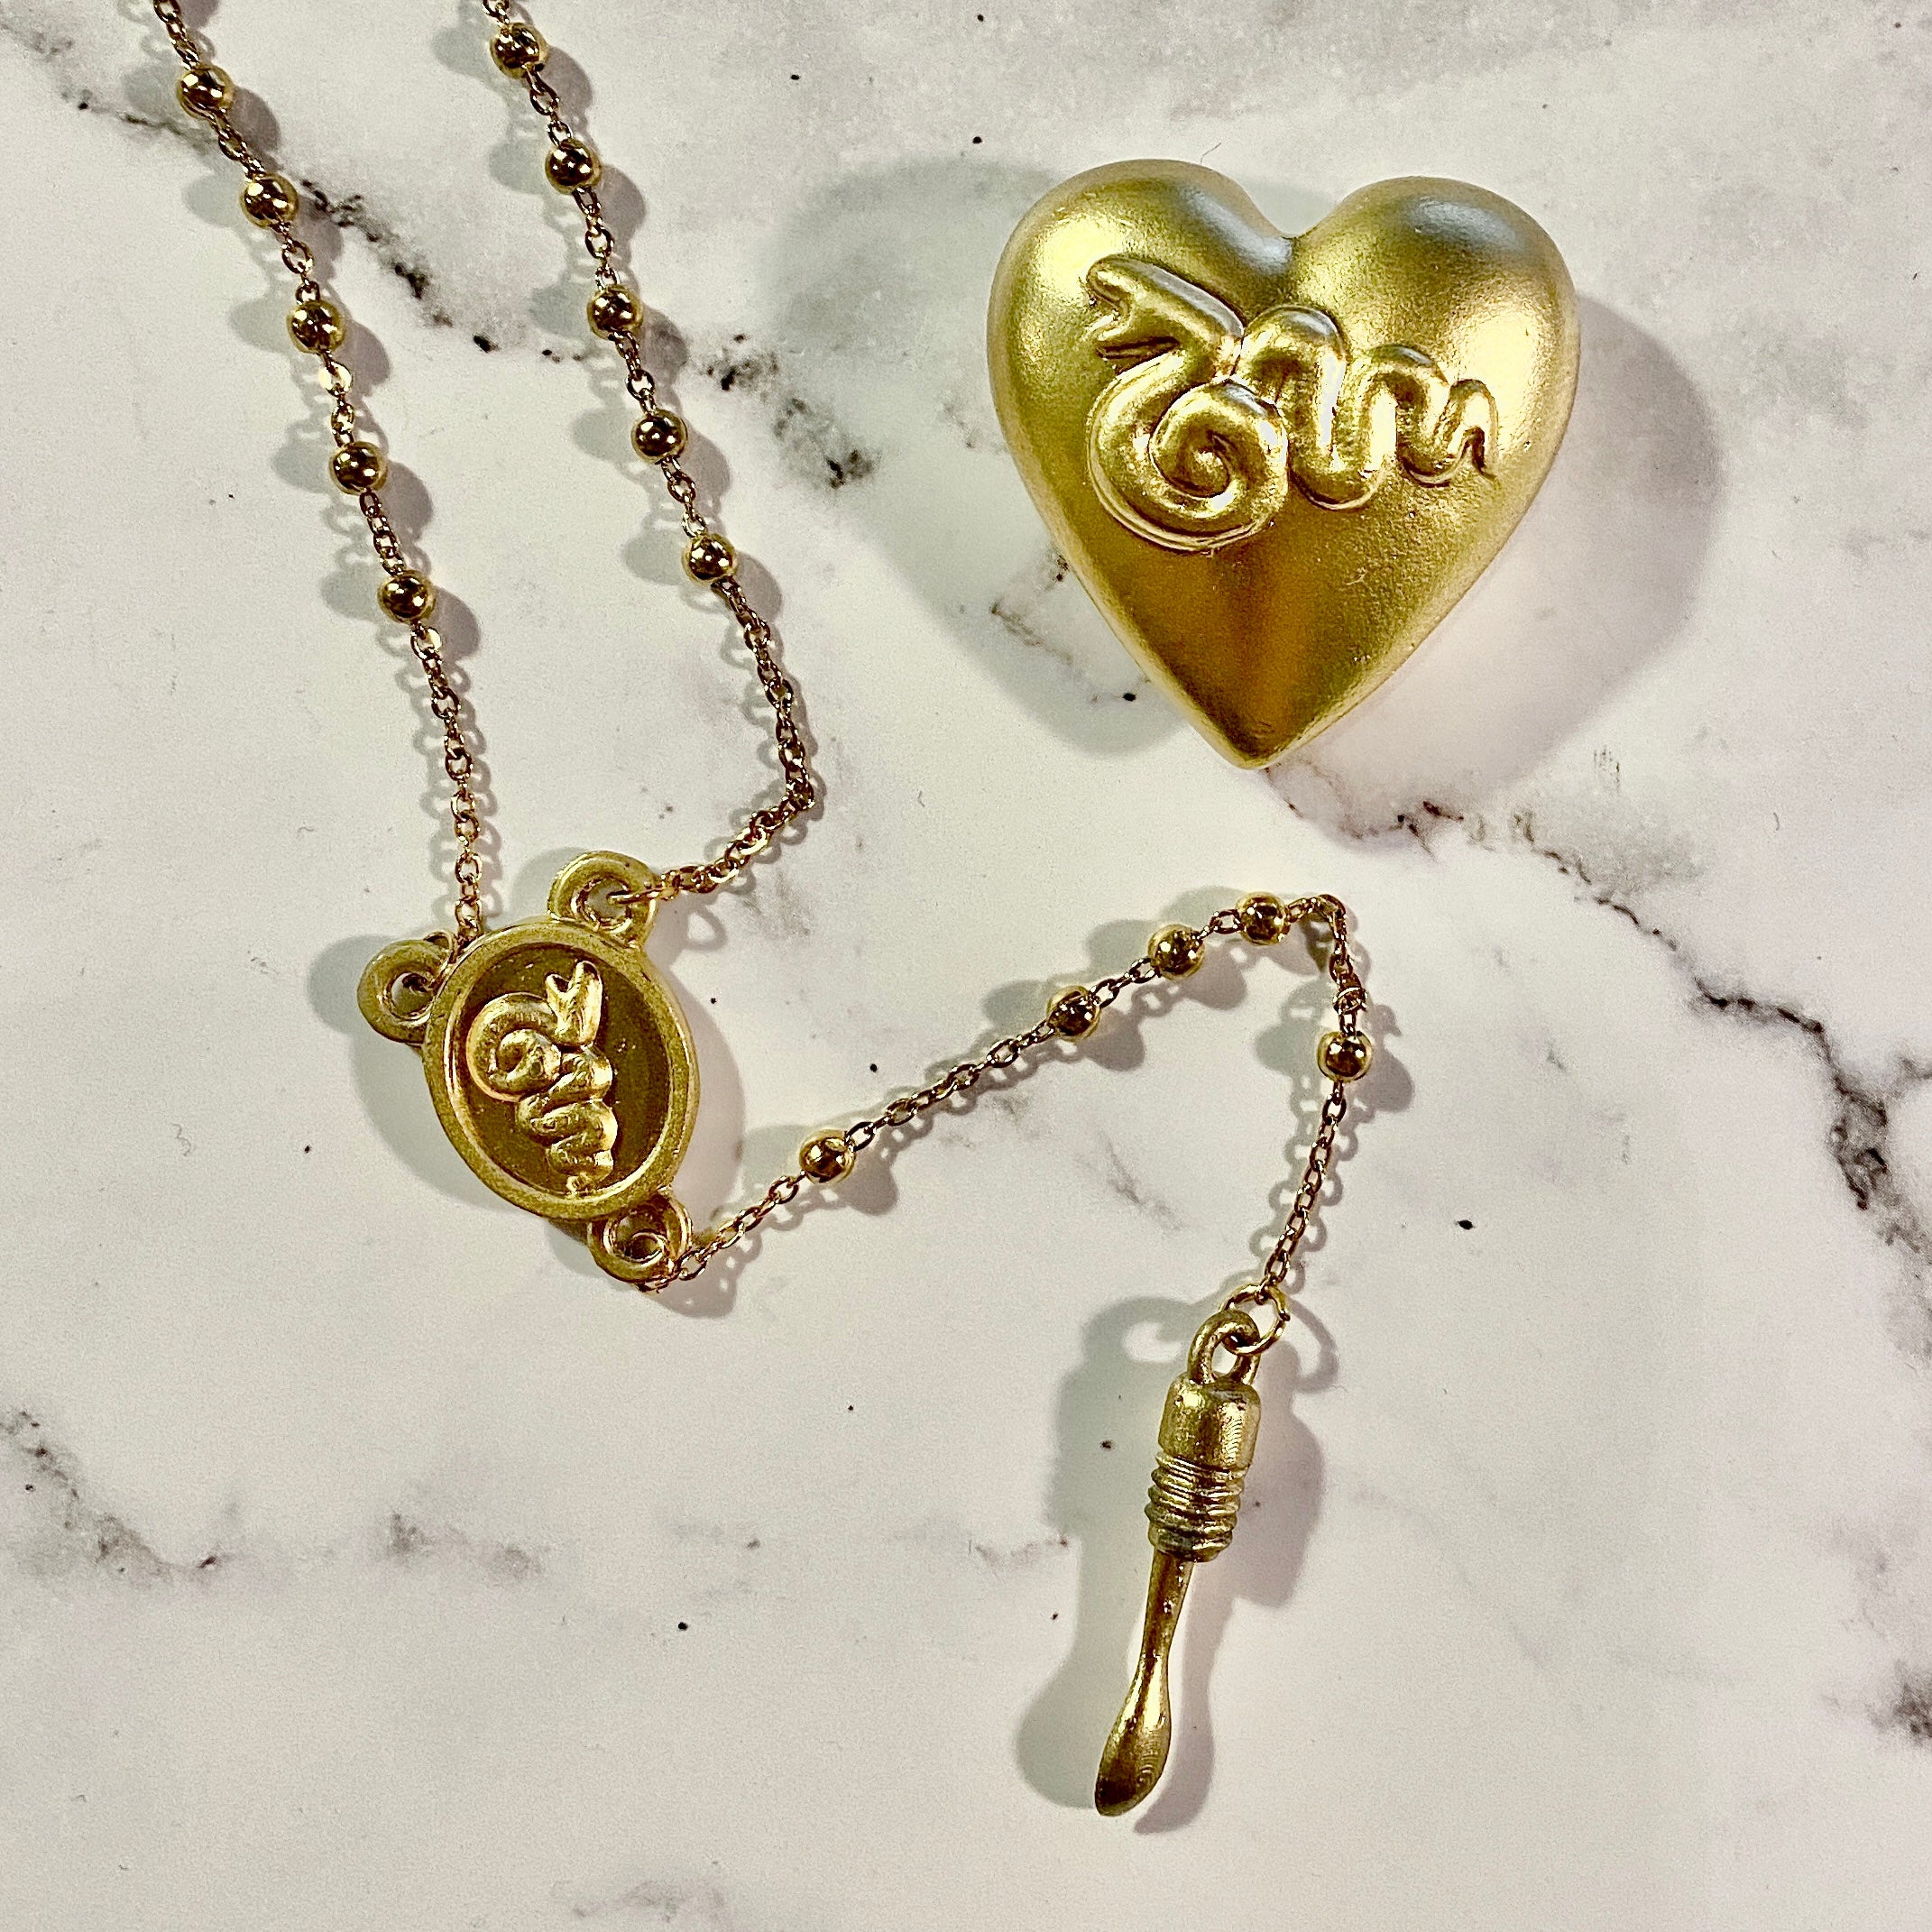 3D Printed LDR Heart Necklace – Underdog Trading Co.